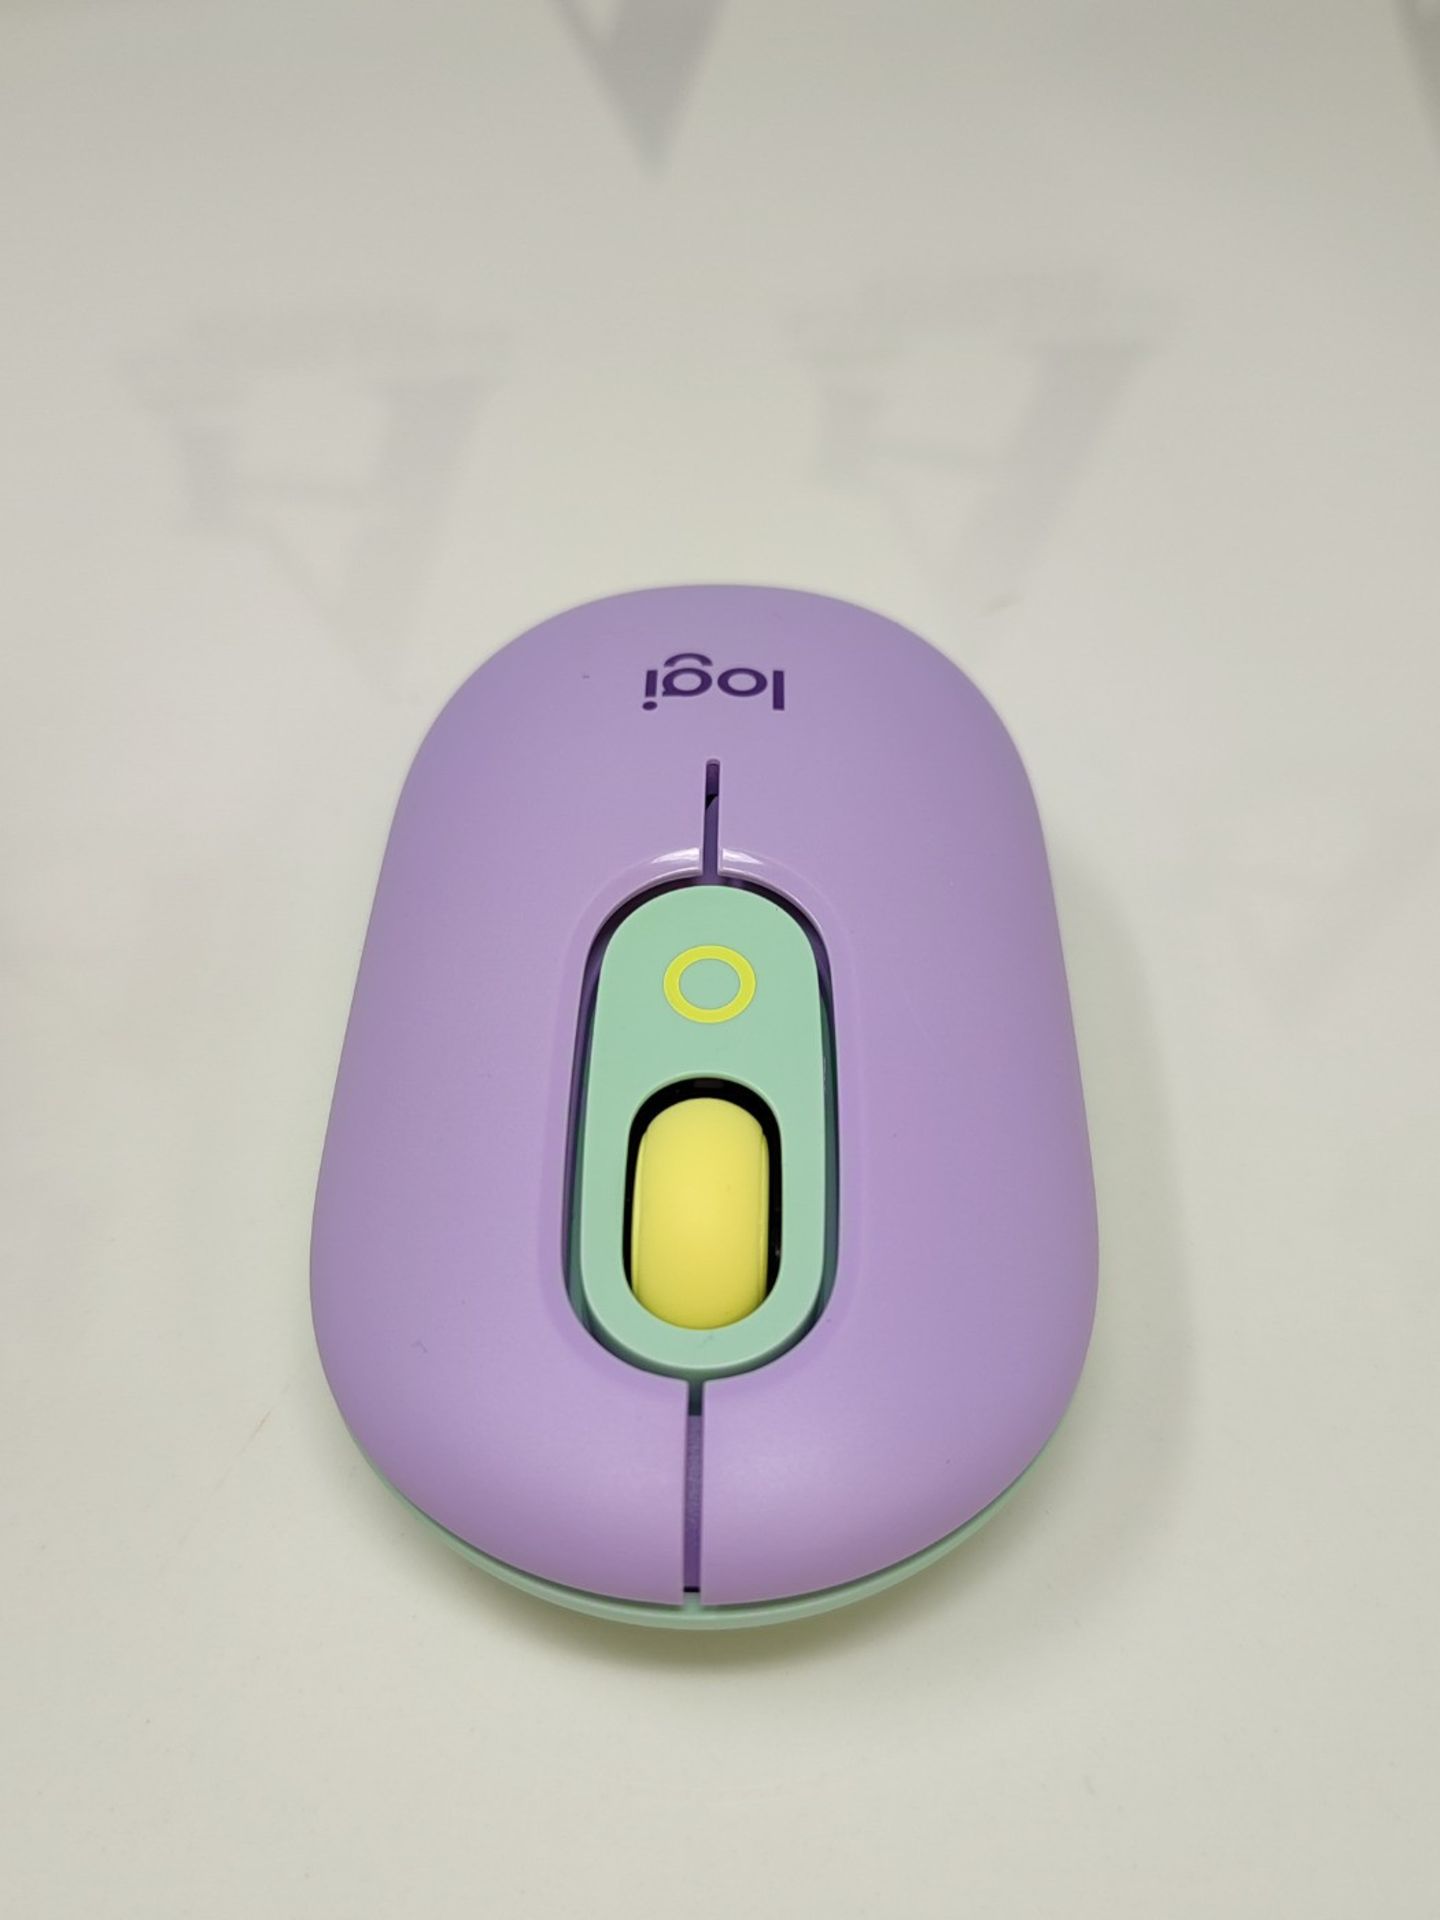 Logitech POP Mouse, Wireless Mouse with customizable emojis, SilentTouch Technology, p - Image 3 of 3